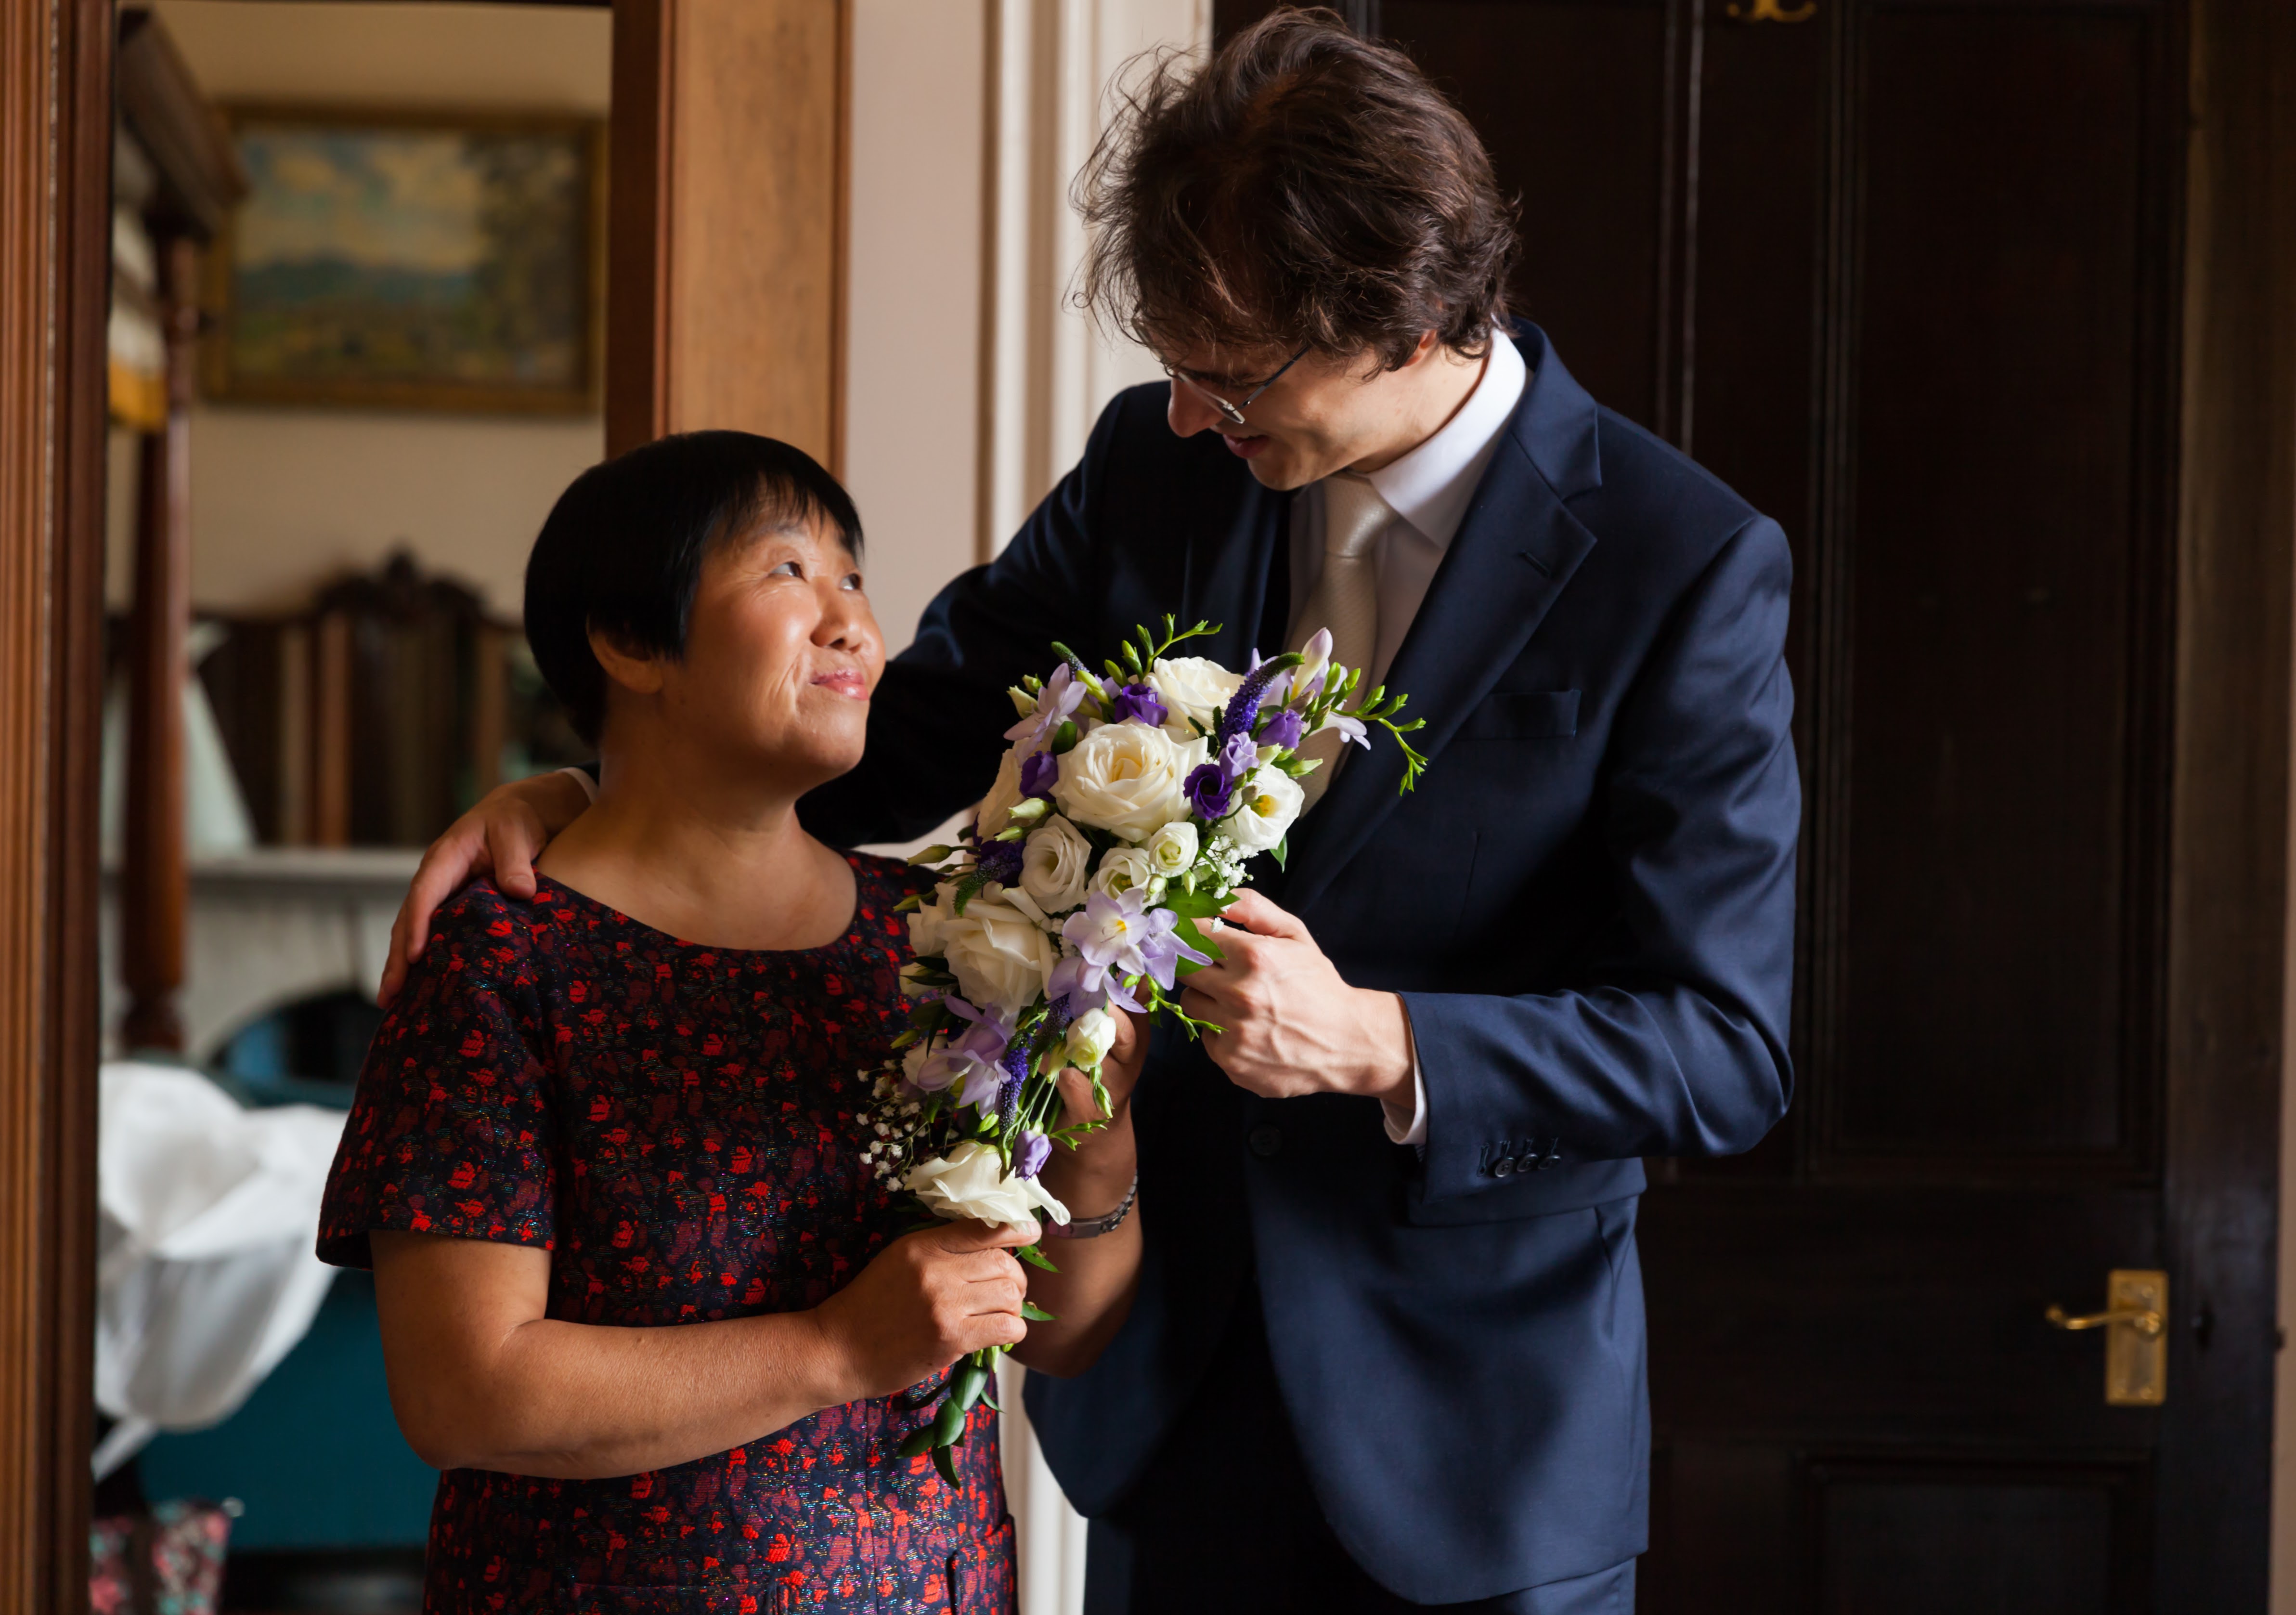 Ciro Santilli with his mother in law during his wedding in 2017